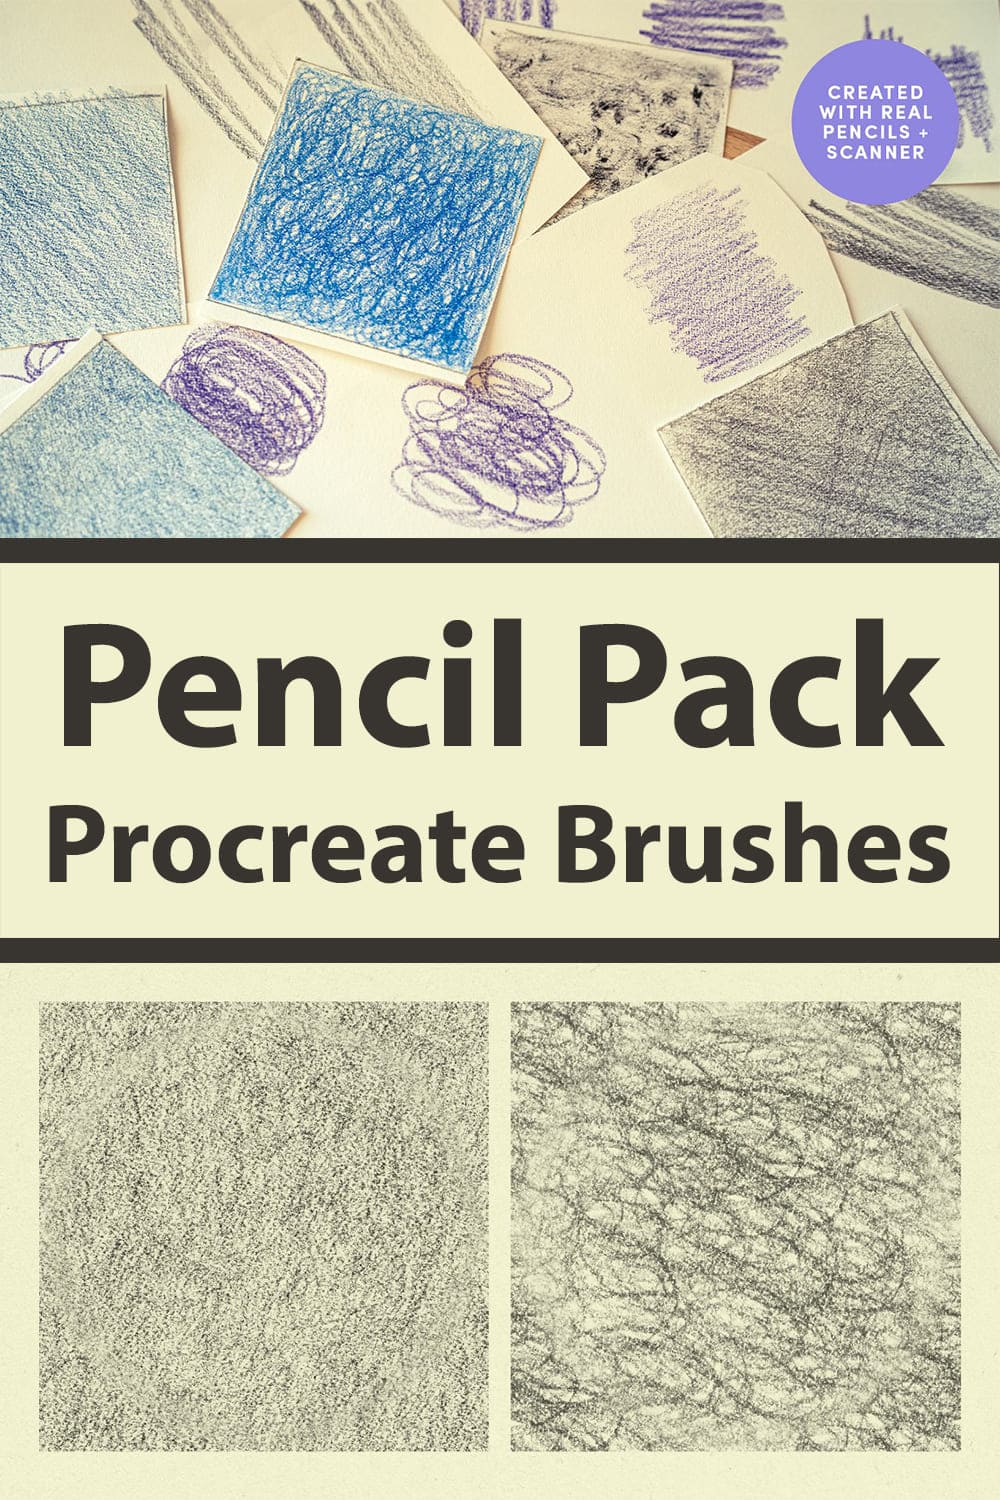 Pencil Pack Procreate Brushes Preview.